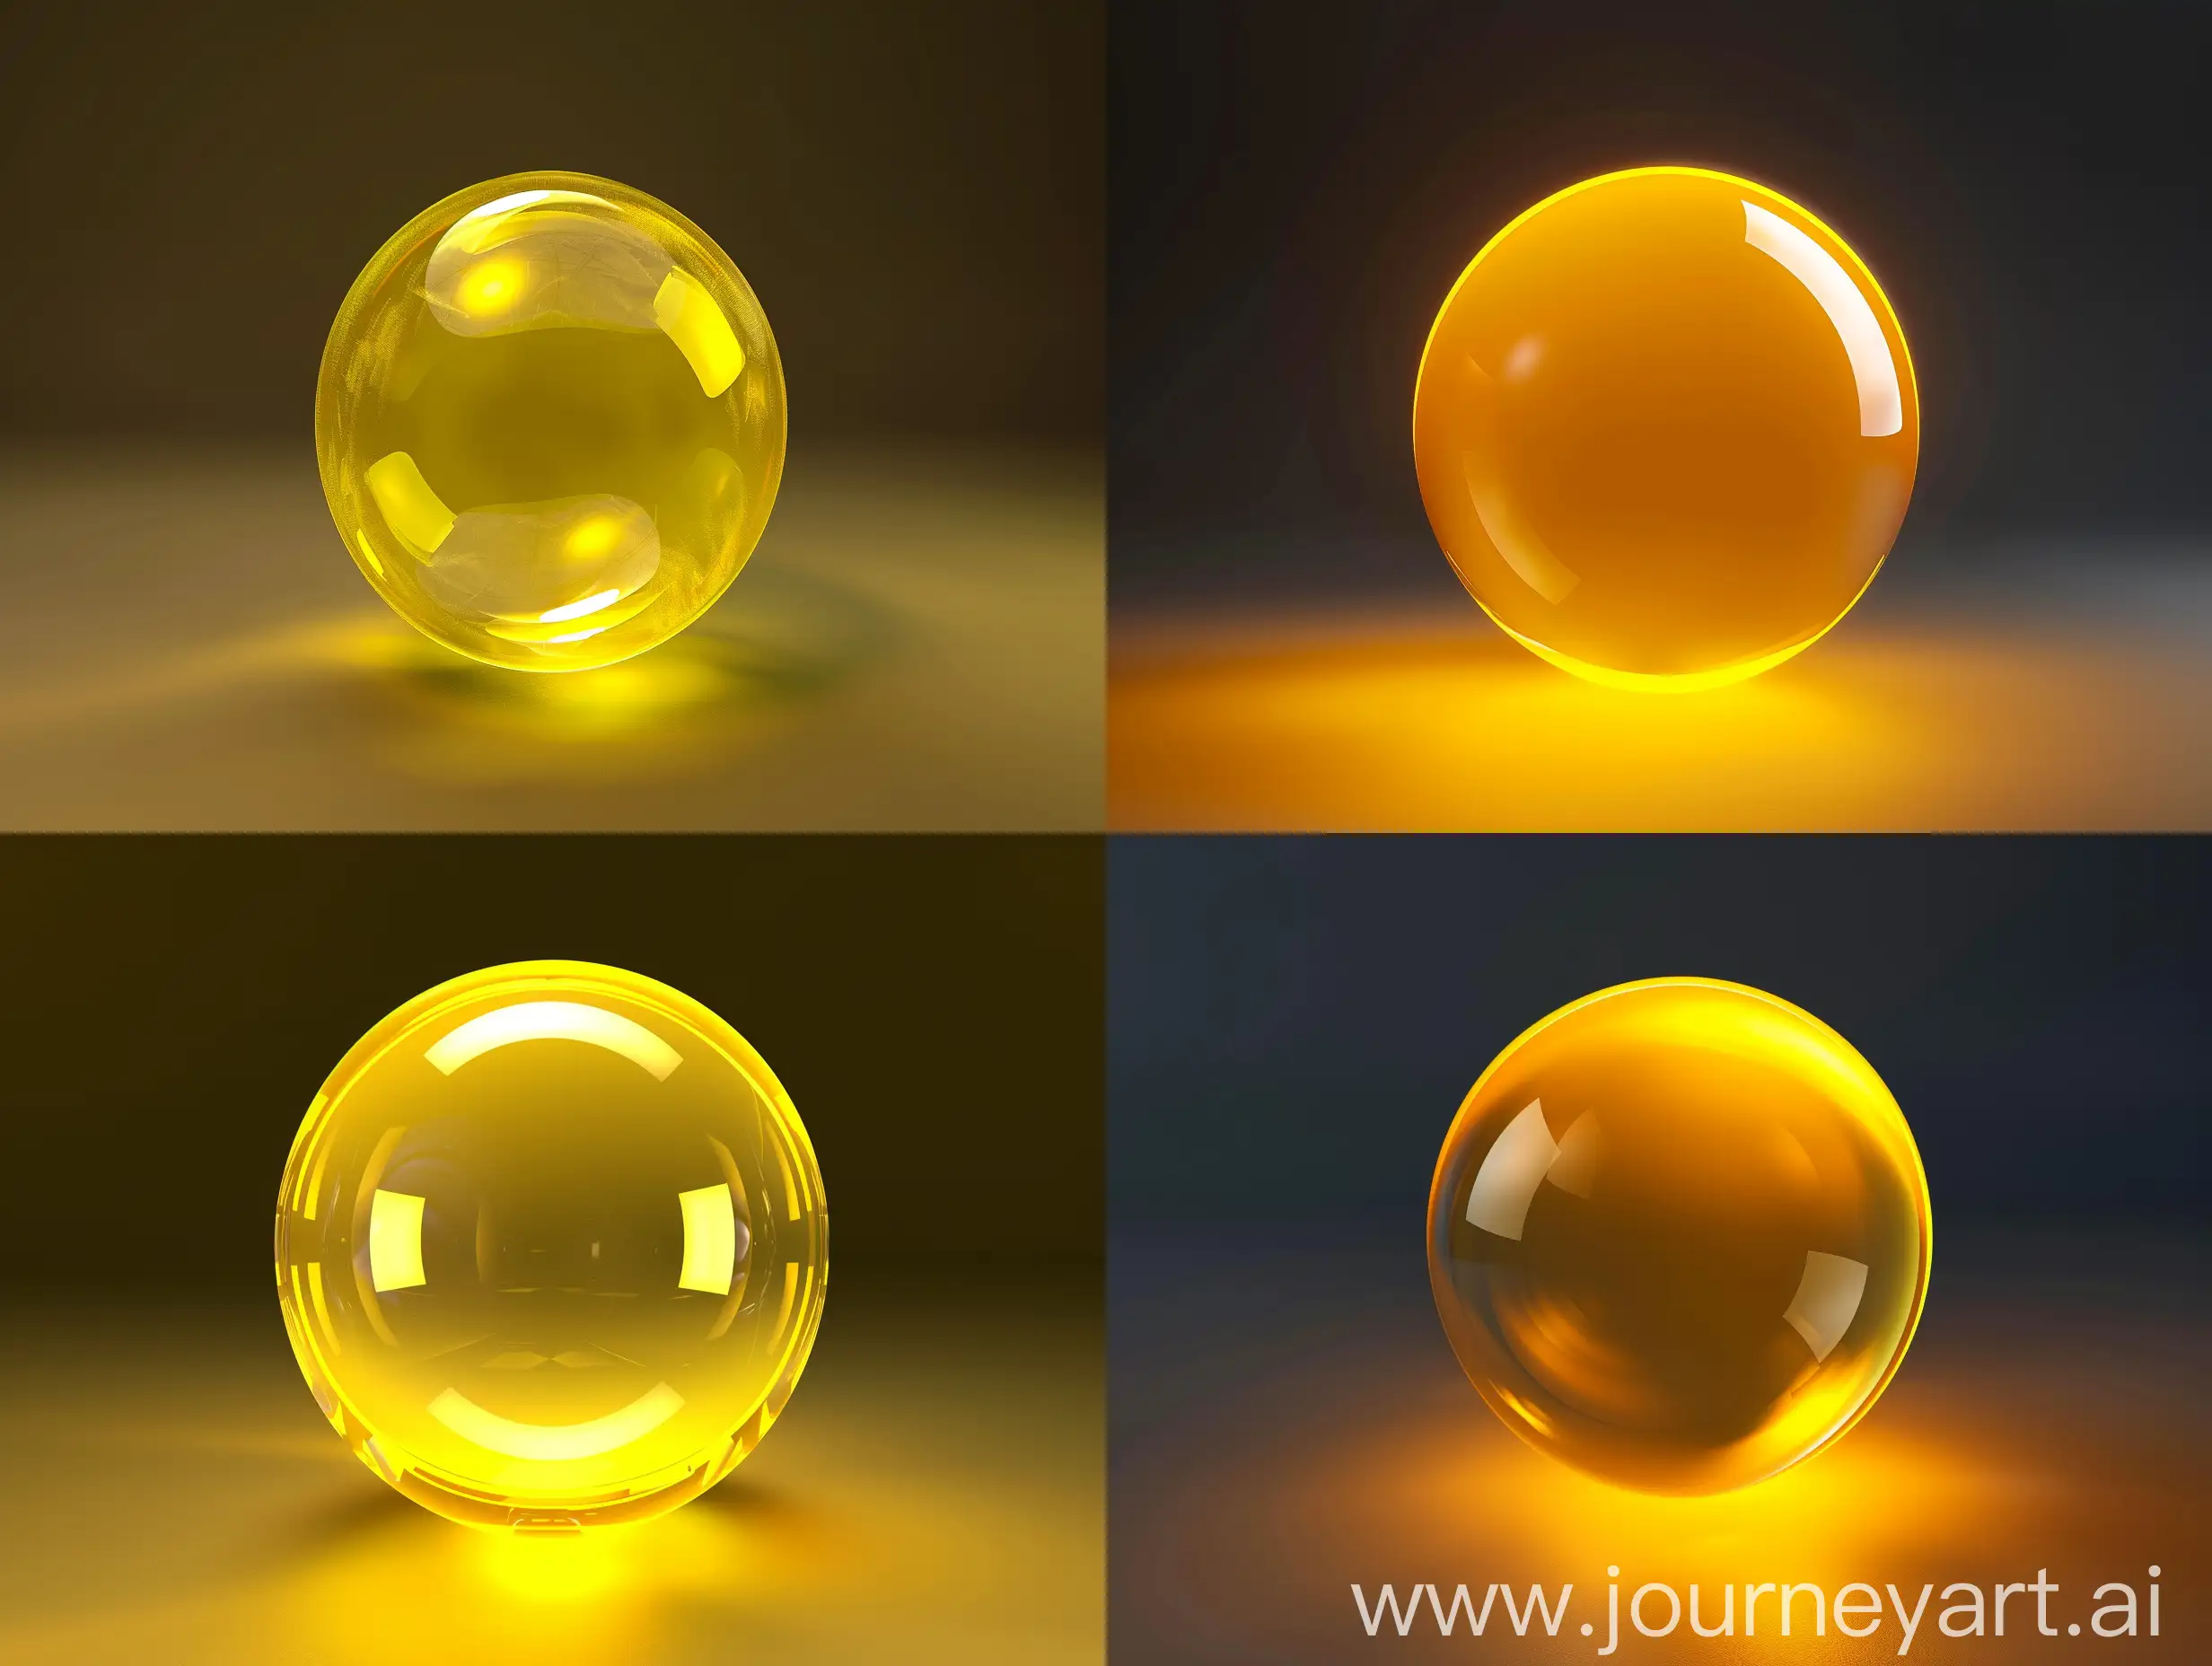 an abstract yellow 3d shaped sphere against a dark solid background, uniform lighting across the shape, glassy and smooth texture